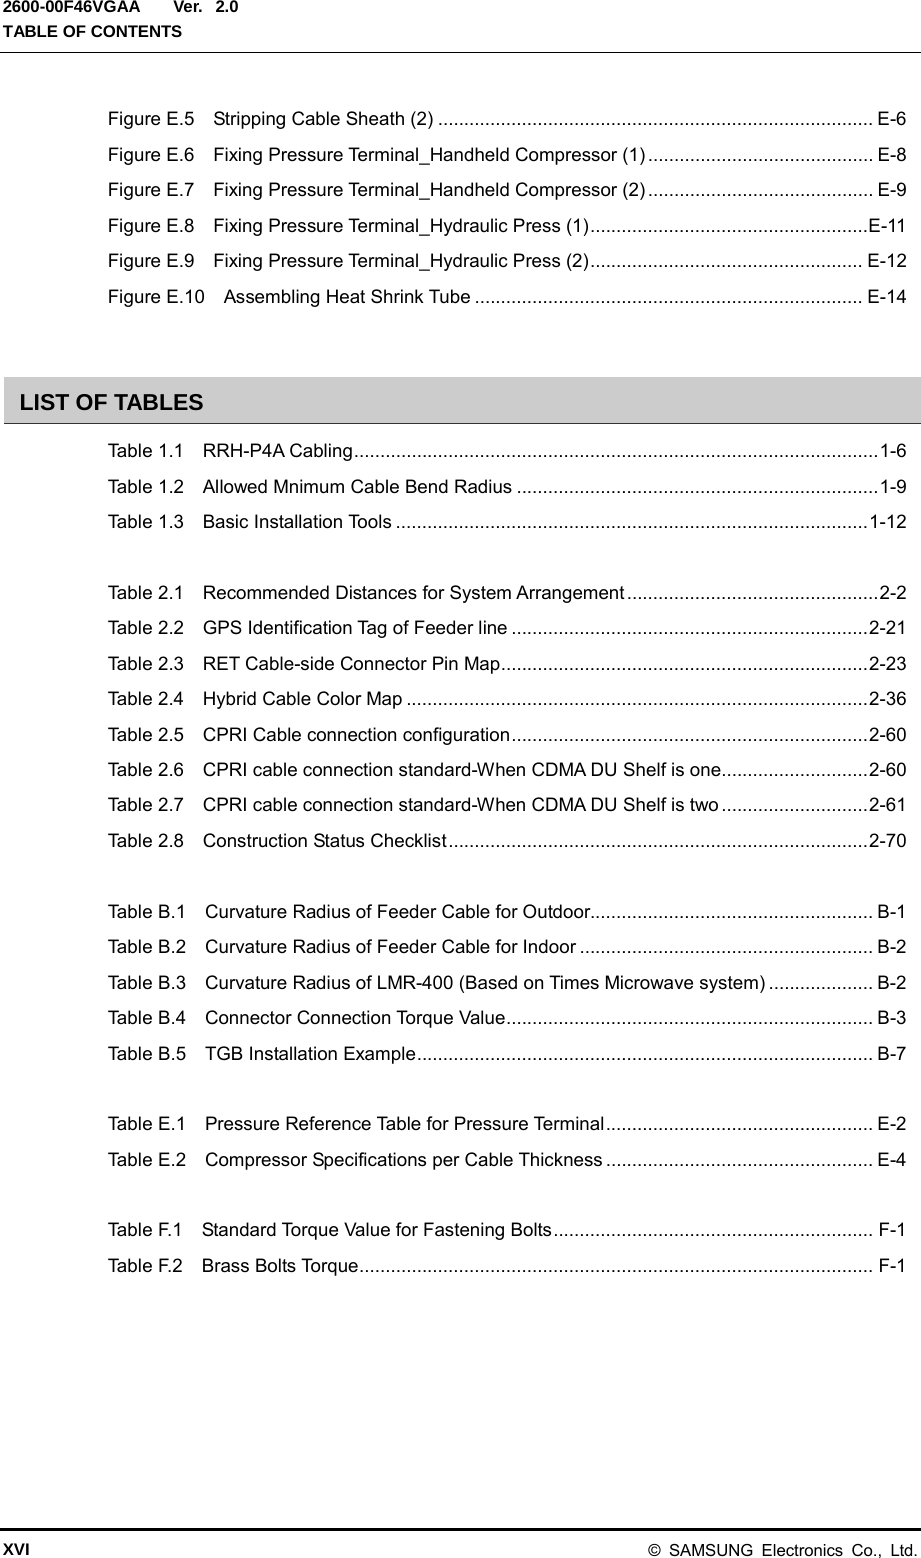  Ver.  TABLE OF CONTENTS 2600-00F46VGAA 2.0 Figure E.5    Stripping Cable Sheath (2) ................................................................................... E-6 Figure E.6    Fixing Pressure Terminal_Handheld Compressor (1) ........................................... E-8 Figure E.7    Fixing Pressure Terminal_Handheld Compressor (2) ........................................... E-9 Figure E.8    Fixing Pressure Terminal_Hydraulic Press (1) ..................................................... E-11 Figure E.9    Fixing Pressure Terminal_Hydraulic Press (2) .................................................... E-12 Figure E.10    Assembling Heat Shrink Tube .......................................................................... E-14  LIST OF TABLES Table 1.1    RRH-P4A Cabling .................................................................................................... 1-6 Table 1.2    Allowed Mnimum Cable Bend Radius ..................................................................... 1-9 Table 1.3    Basic Installation Tools .......................................................................................... 1-12  Table 2.1    Recommended Distances for System Arrangement ................................................ 2-2 Table 2.2    GPS Identification Tag of Feeder line .................................................................... 2-21 Table 2.3    RET Cable-side Connector Pin Map ...................................................................... 2-23 Table 2.4    Hybrid Cable Color Map ........................................................................................ 2-36 Table 2.5    CPRI Cable connection configuration .................................................................... 2-60 Table 2.6    CPRI cable connection standard-When CDMA DU Shelf is one............................ 2-60 Table 2.7    CPRI cable connection standard-When CDMA DU Shelf is two ............................ 2-61 Table 2.8    Construction Status Checklist ................................................................................ 2-70  Table B.1    Curvature Radius of Feeder Cable for Outdoor...................................................... B-1 Table B.2    Curvature Radius of Feeder Cable for Indoor ........................................................ B-2 Table B.3    Curvature Radius of LMR-400 (Based on Times Microwave system) .................... B-2 Table B.4    Connector Connection Torque Value ...................................................................... B-3 Table B.5    TGB Installation Example ....................................................................................... B-7  Table E.1    Pressure Reference Table for Pressure Terminal ................................................... E-2 Table E.2    Compressor Specifications per Cable Thickness ................................................... E-4  Table F.1    Standard Torque Value for Fastening Bolts ............................................................. F-1 Table F.2    Brass Bolts Torque .................................................................................................. F-1    XVI © SAMSUNG Electronics Co., Ltd. 